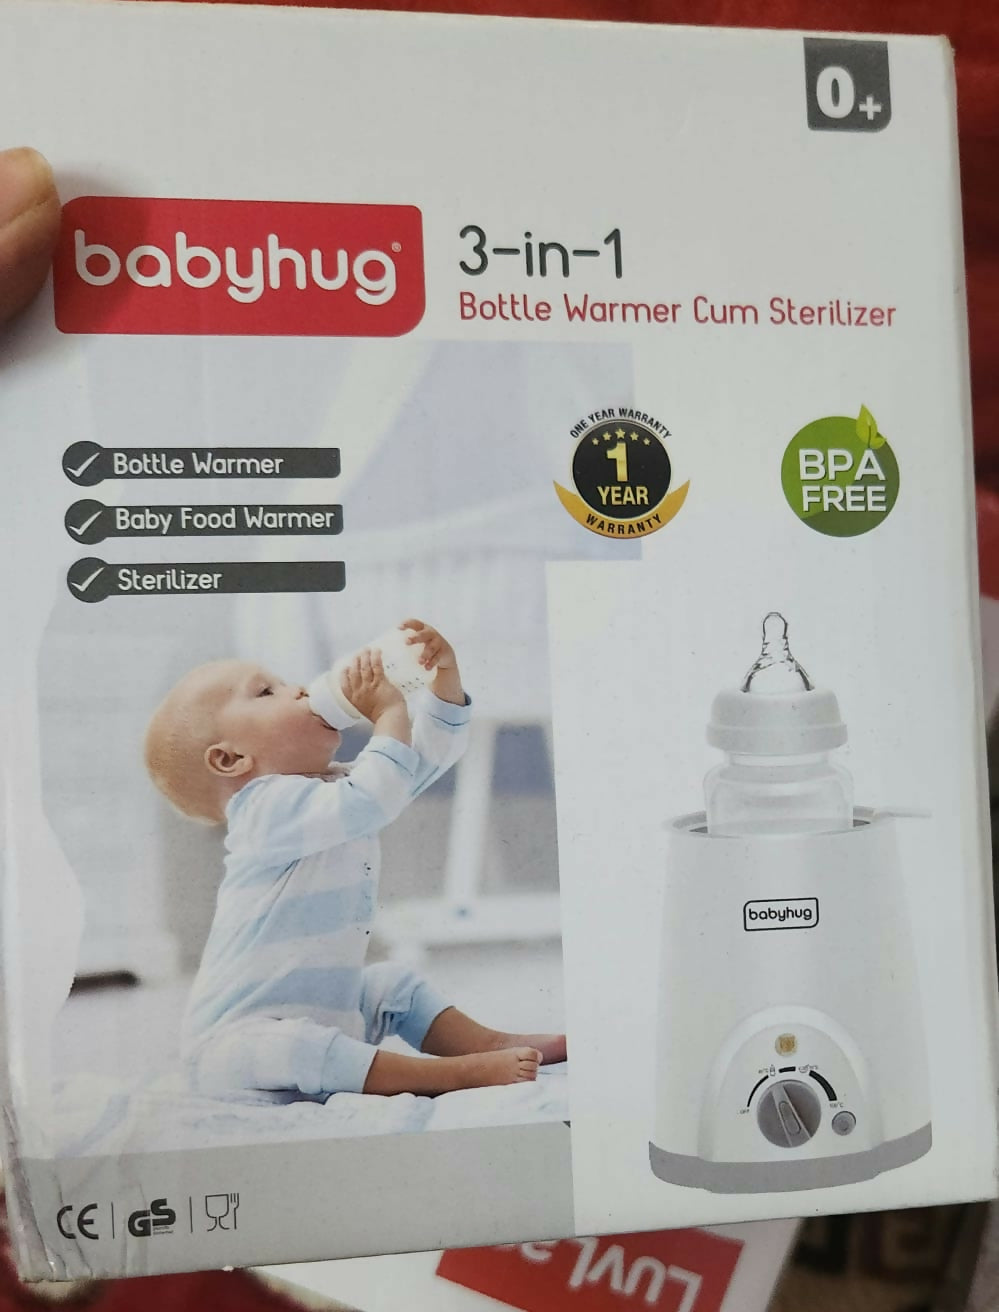 Ensure your baby’s bottles are clean and at the perfect temperature with the BABYHUG Steriliser cum Warmer Bottle – a versatile, compact, and efficient solution for sterilizing and warming feeding essentials.